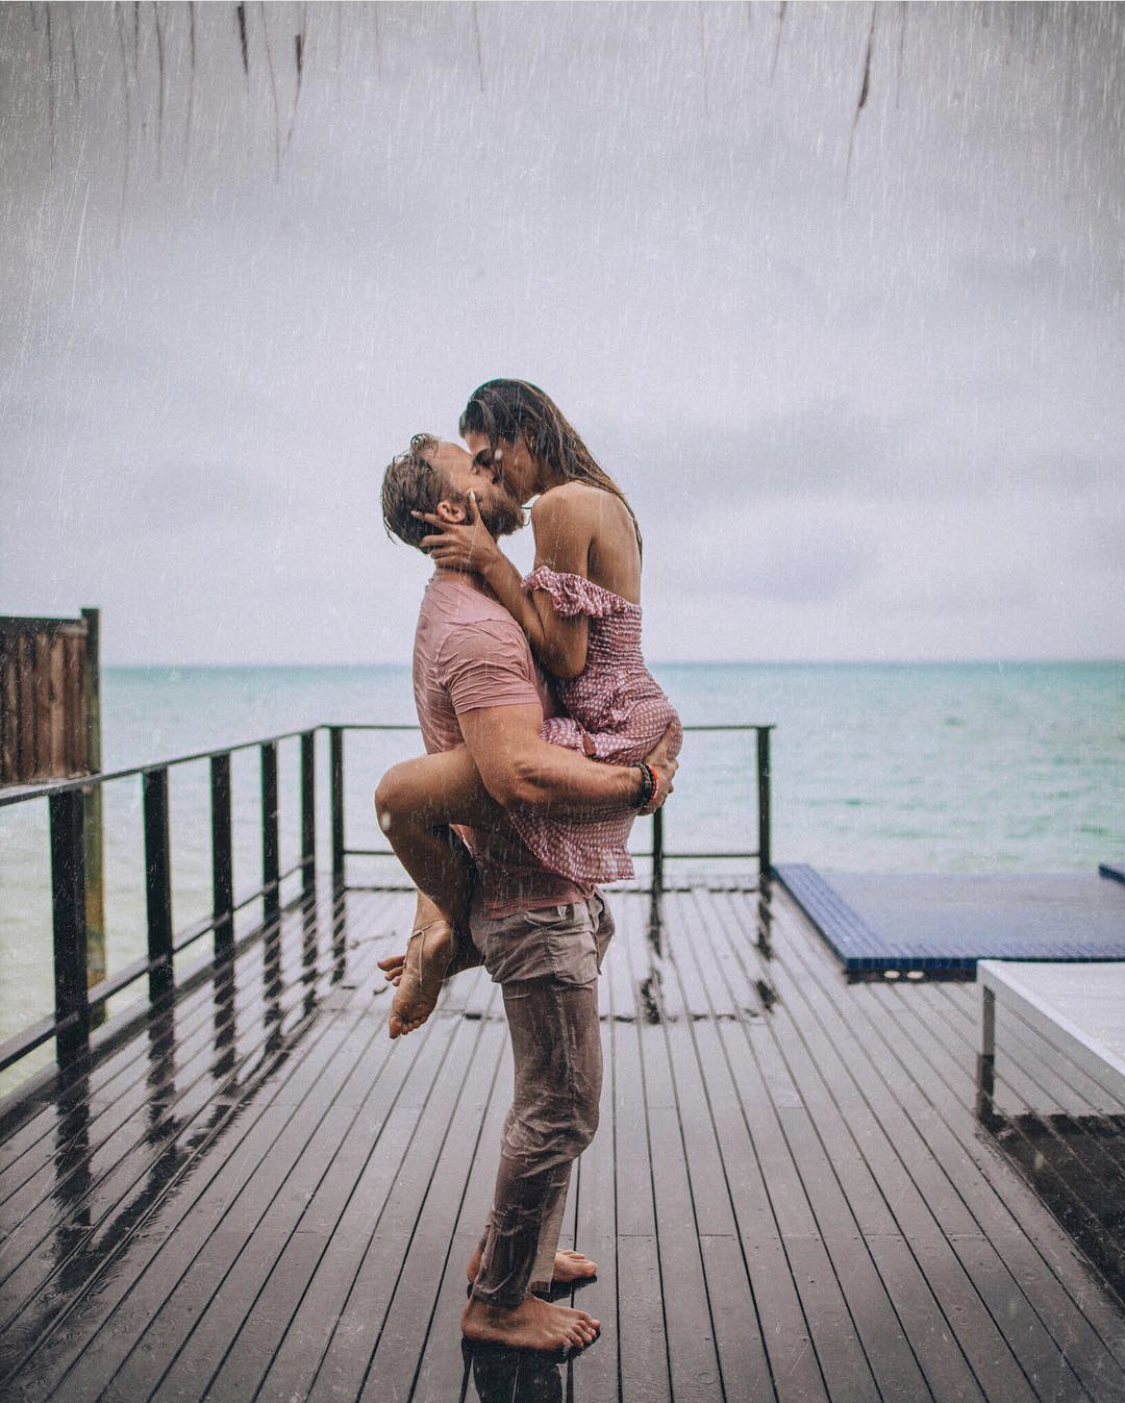 Couple recreating The Notebook kiss in the rain in the Maldives